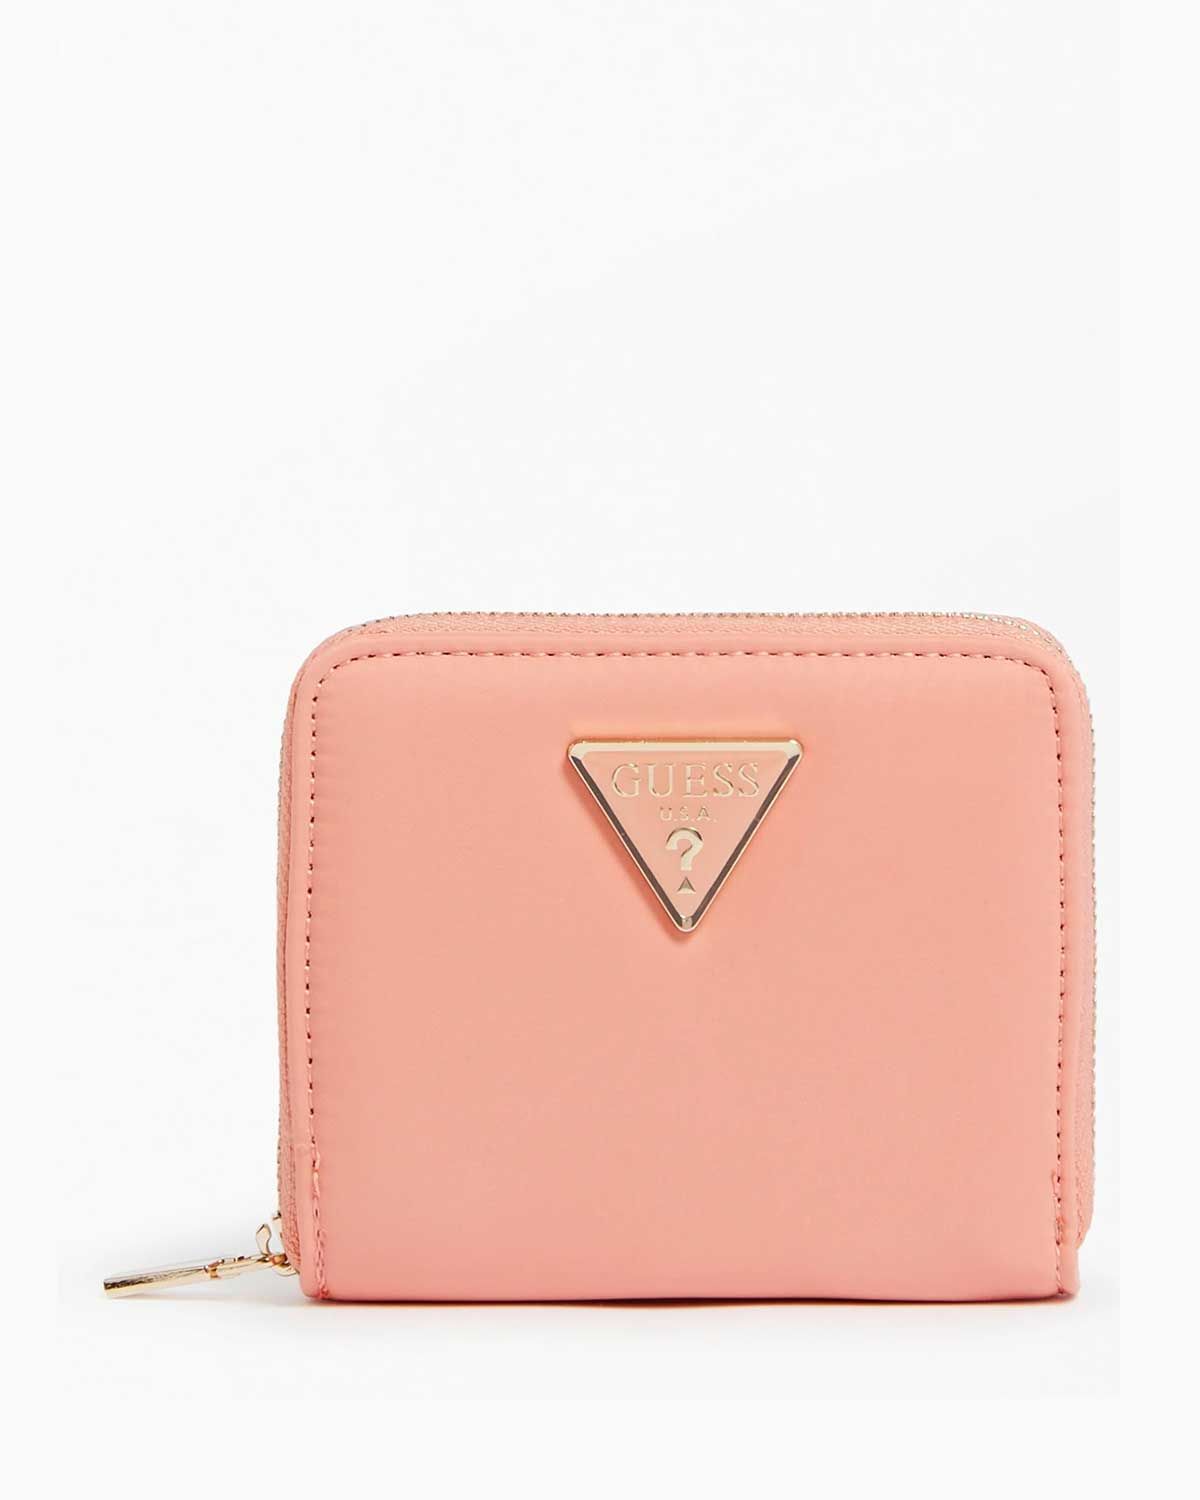 GUESS Eco Gemma Small Zip Around Wallet Coral